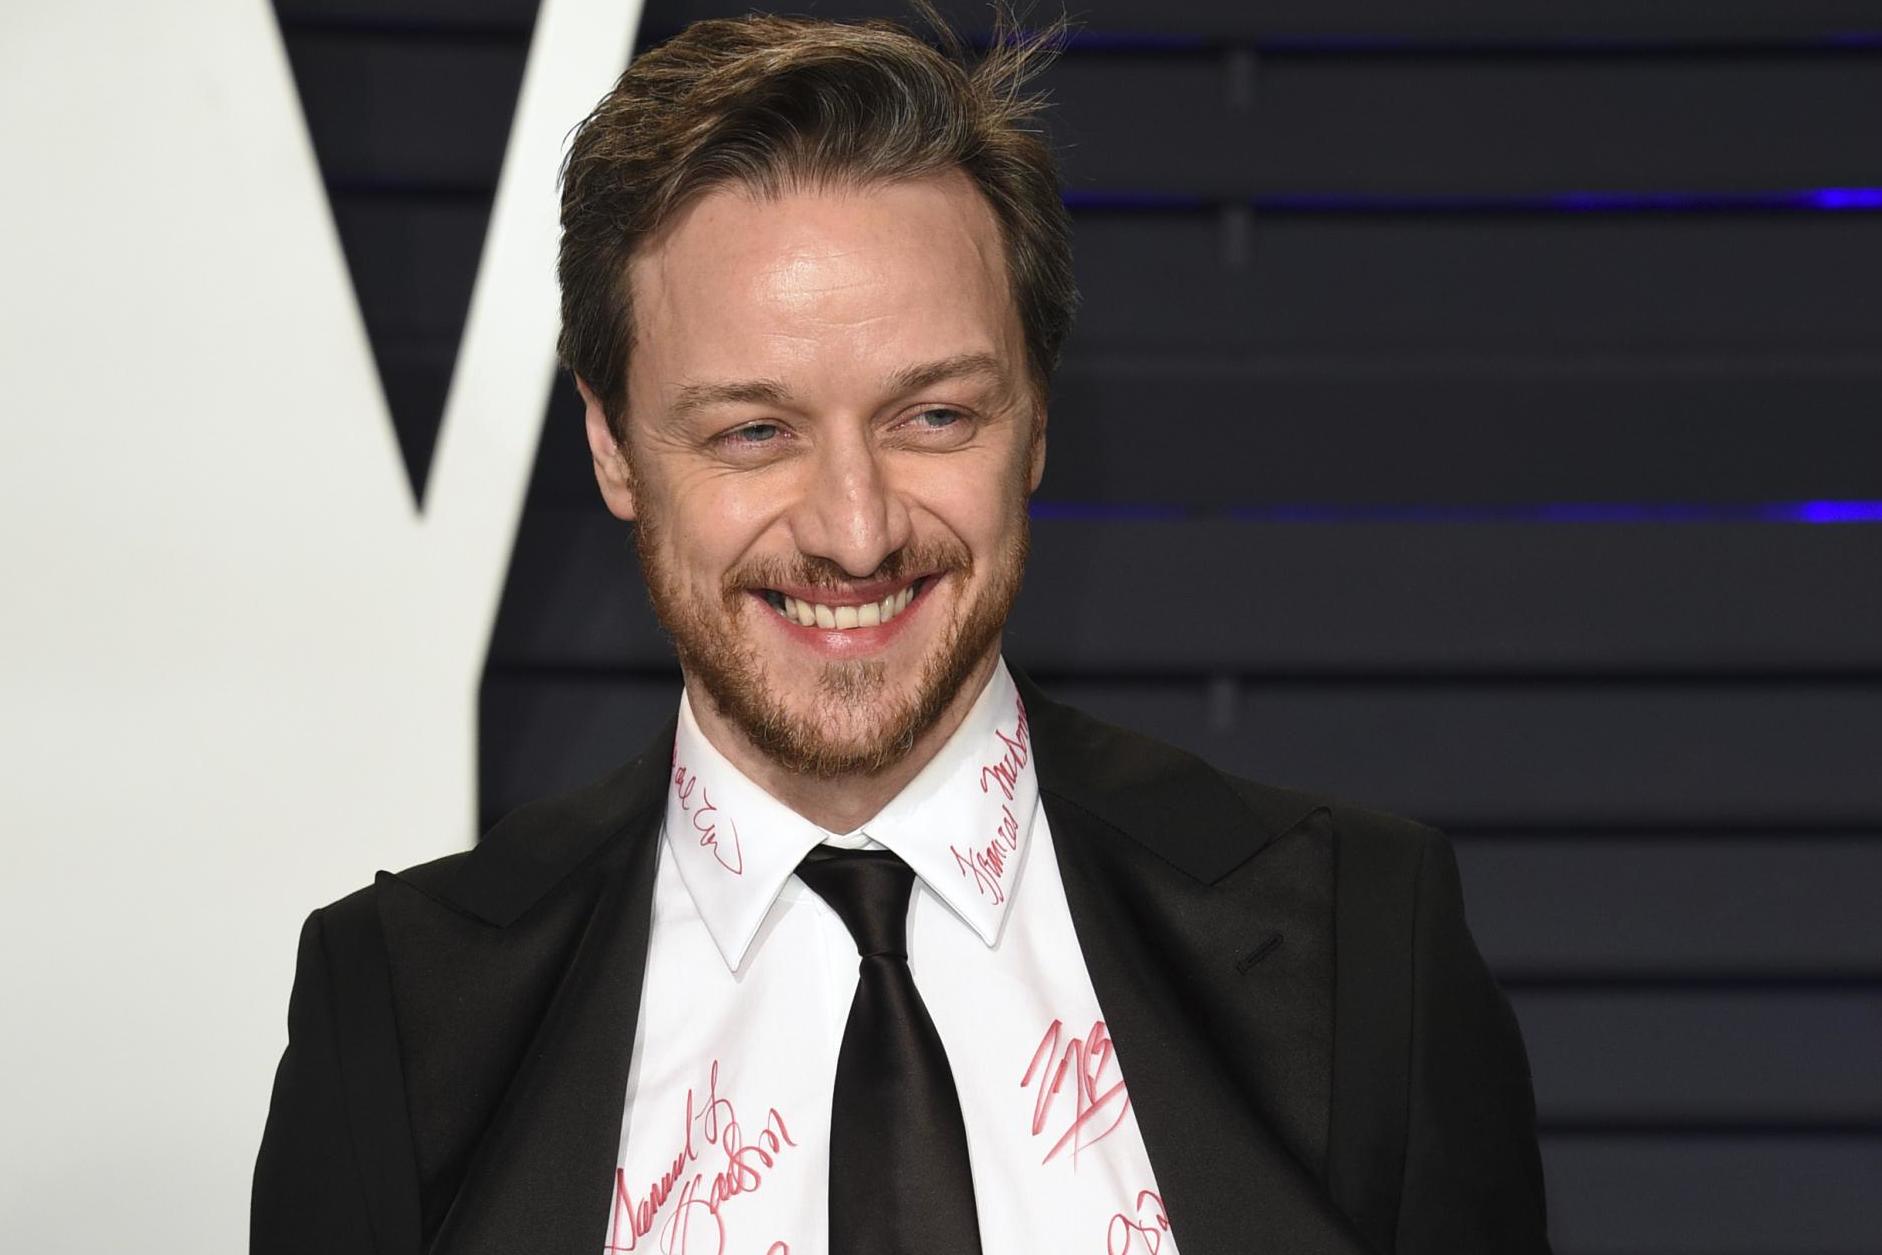 x-men-star-james-mcavoy-donates-gbp275000-for-nhs-crowdfunding-campaign-2